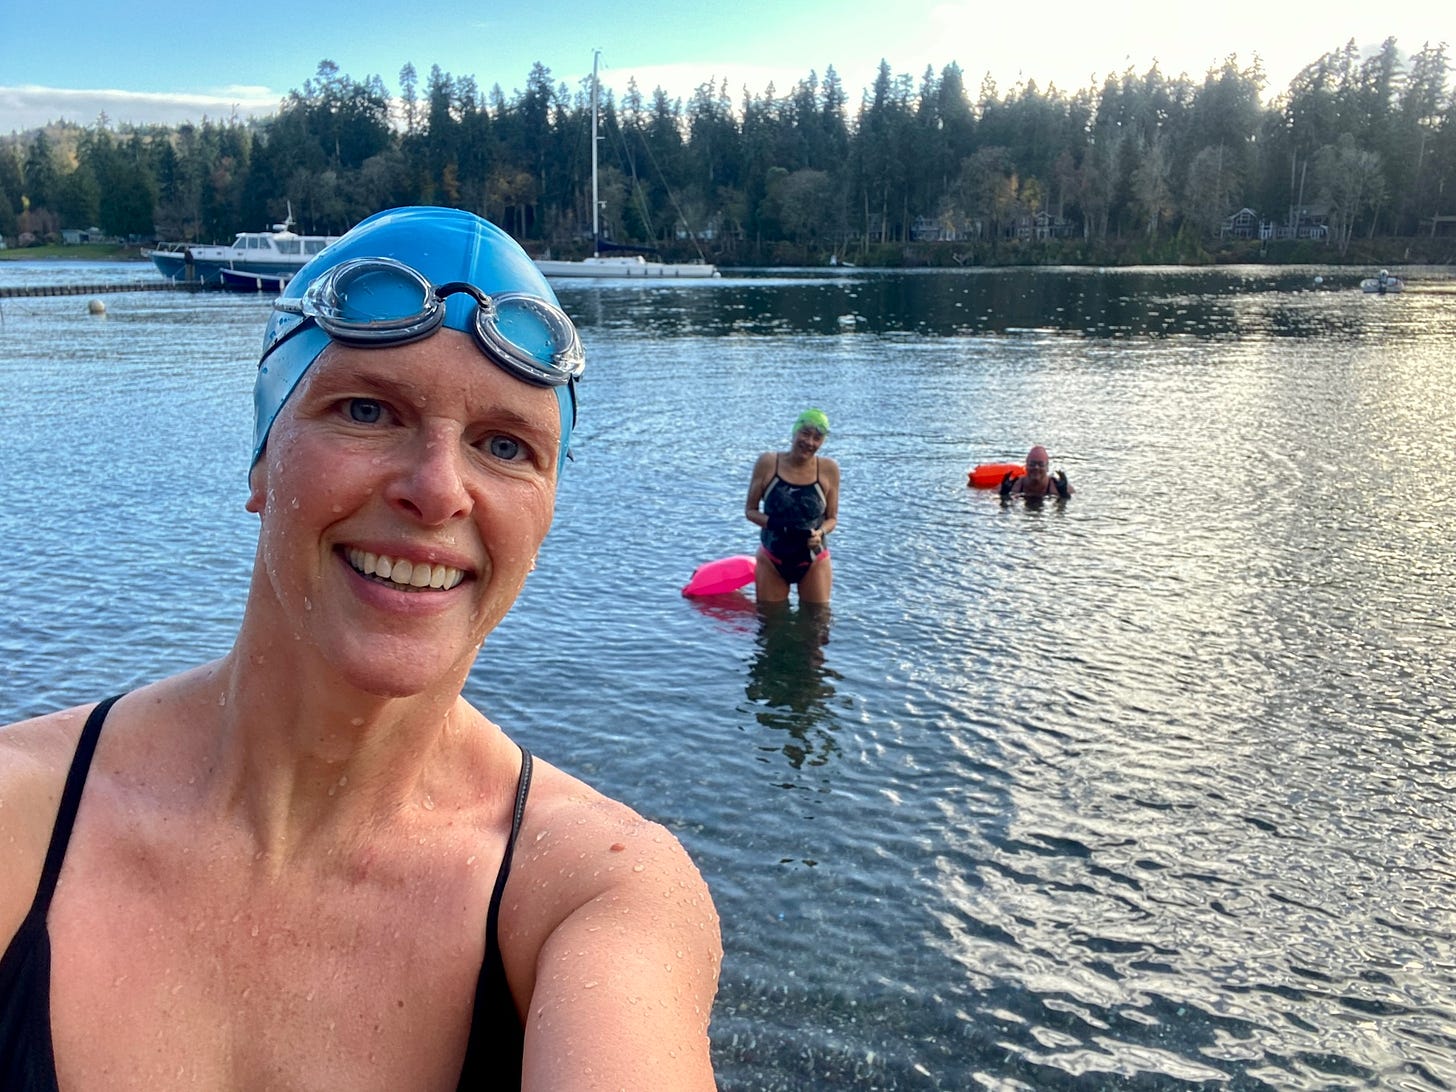 A photo, a selfie by a woman at the shore of the Puget Sound with two women in the water behind her.